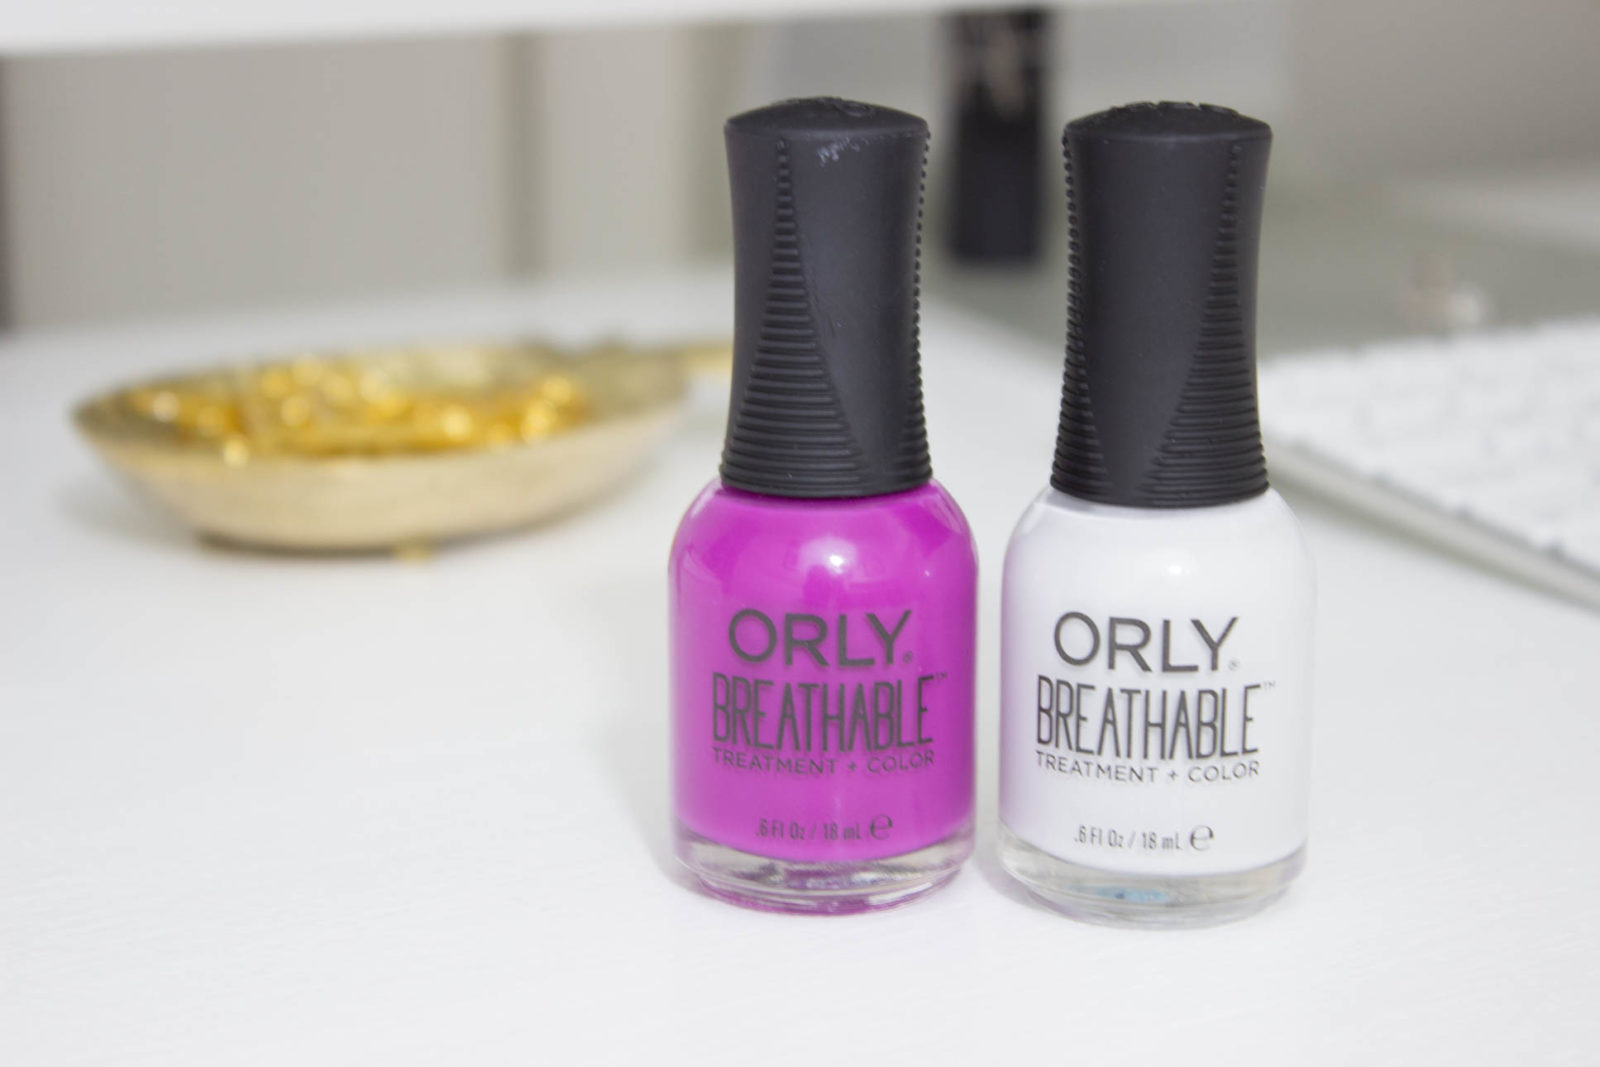 7. Orly Breathable Treatment + Color Nail Polish in "Soul Sister" - wide 4